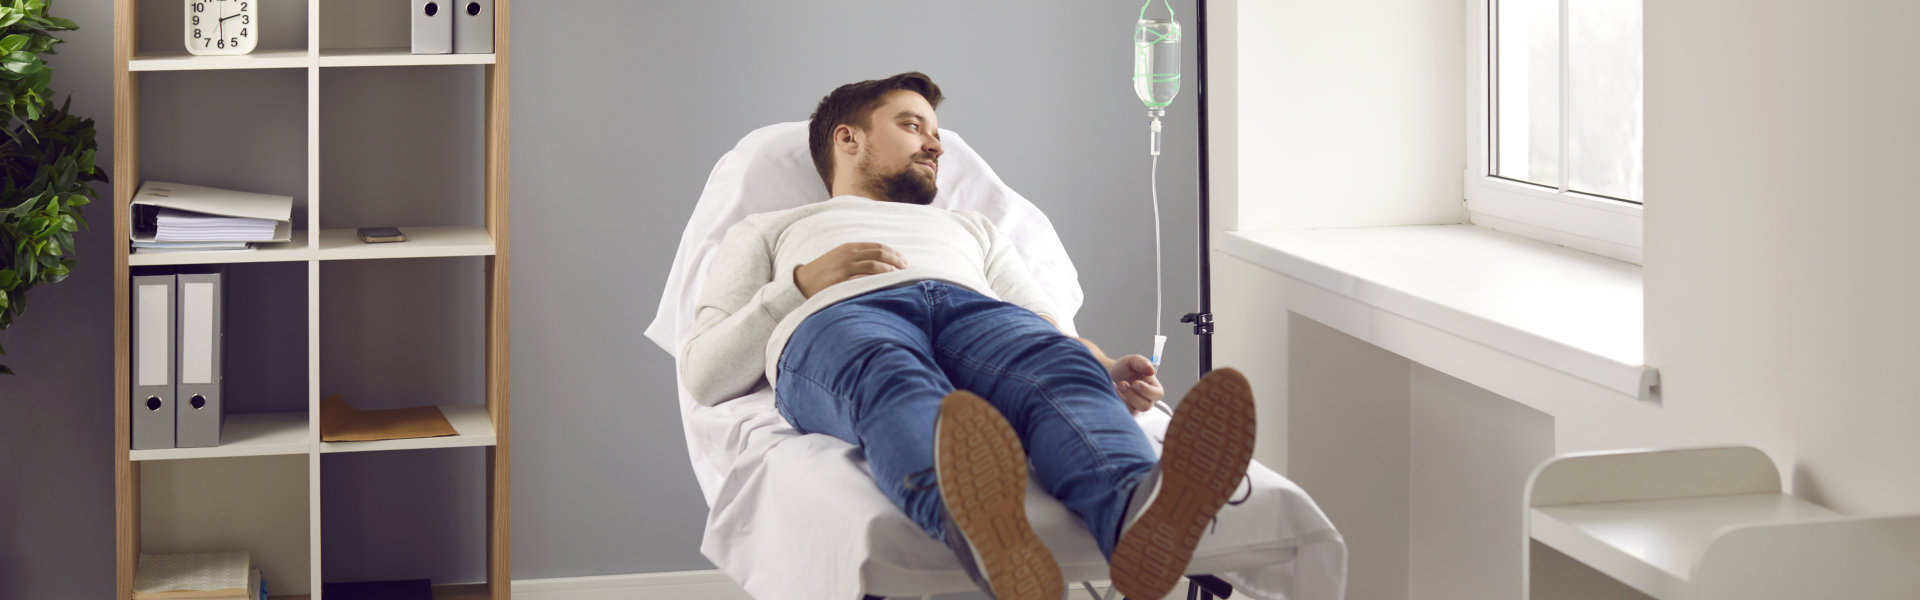 Young man attached to intravenous drip lying on bed